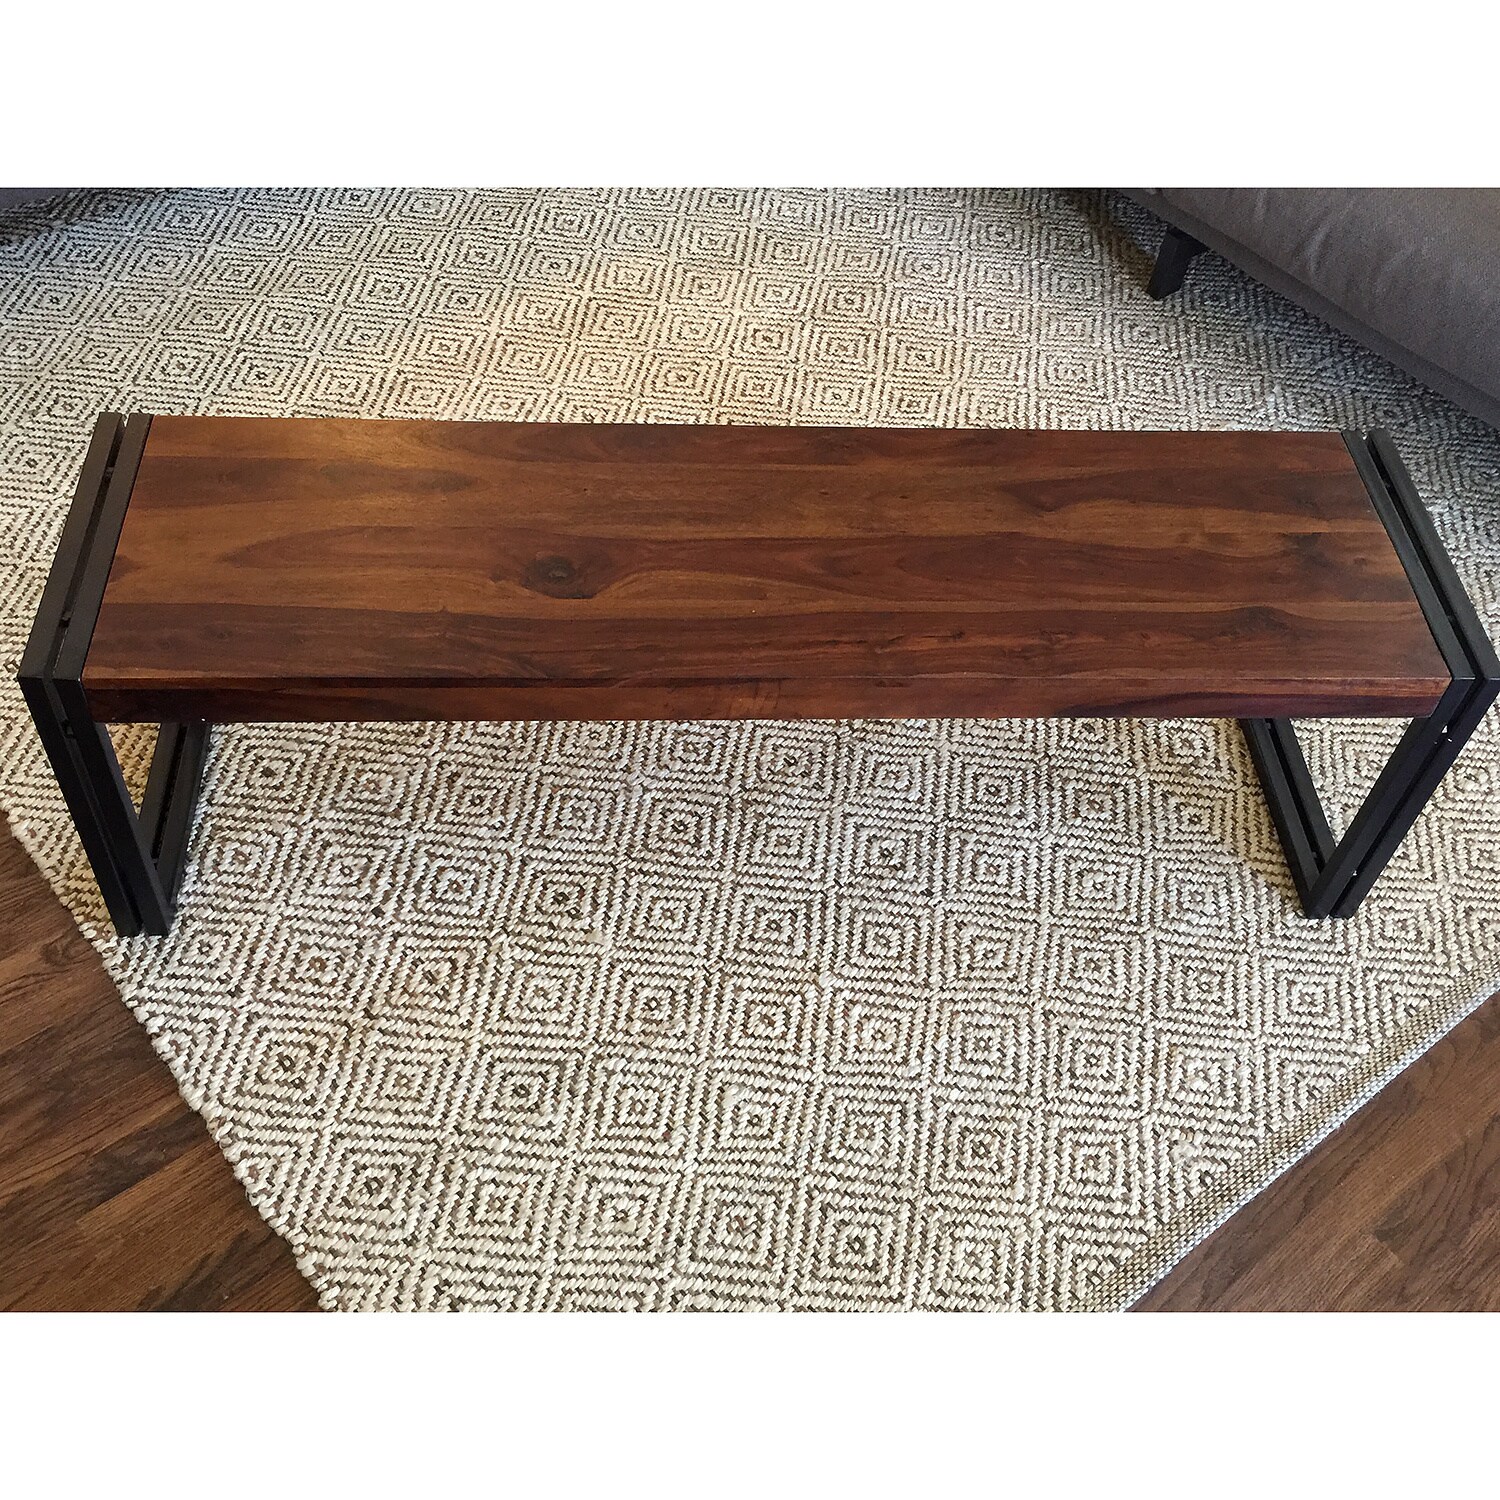 Timbergirl Reclaimed Seesham Wood Bench with Metal Legs 